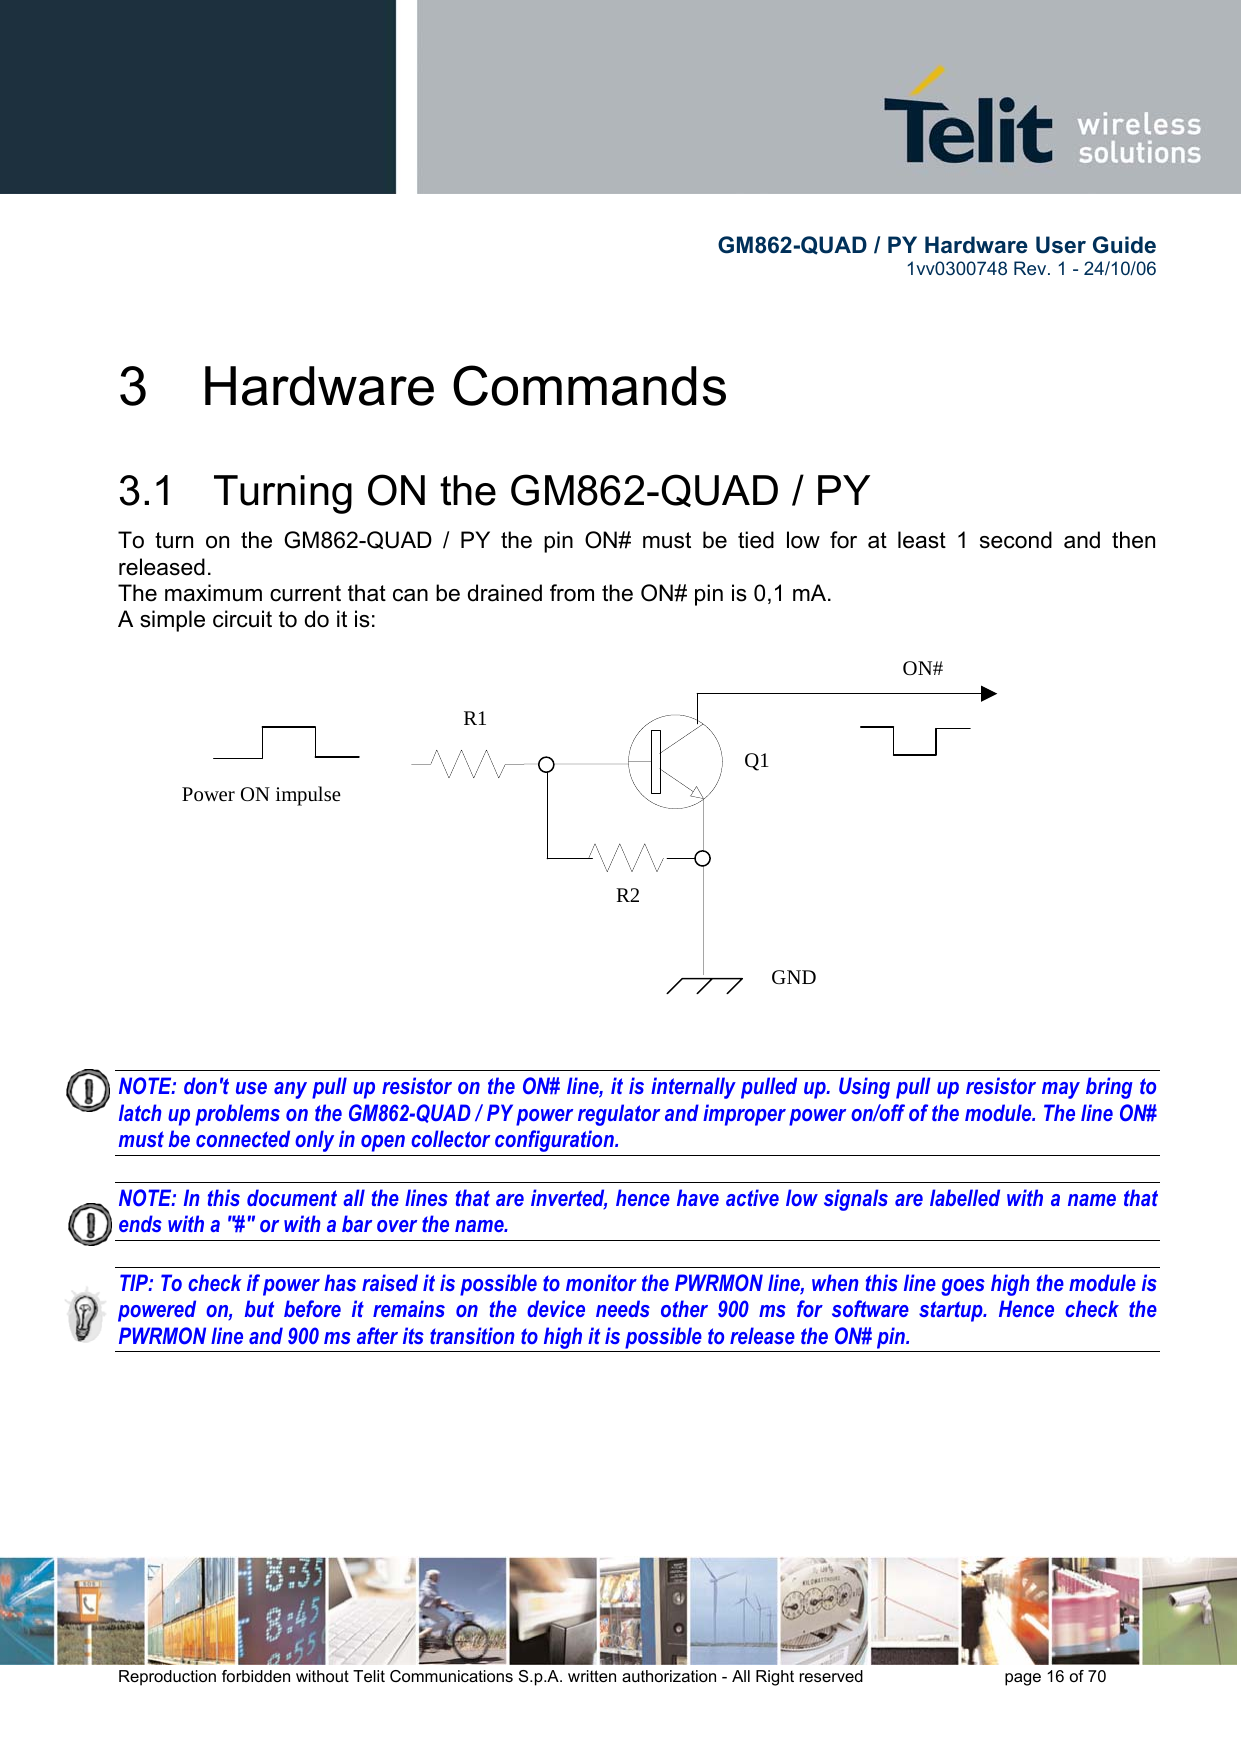        GM862-QUAD / PY Hardware User Guide   1vv0300748 Rev. 1 - 24/10/06    Reproduction forbidden without Telit Communications S.p.A. written authorization - All Right reserved    page 16 of 70  3 Hardware Commands 3.1   Turning ON the GM862-QUAD / PY To turn on the GM862-QUAD / PY the pin ON# must be tied low for at least 1 second and then released. The maximum current that can be drained from the ON# pin is 0,1 mA. A simple circuit to do it is:   NOTE: don&apos;t use any pull up resistor on the ON# line, it is internally pulled up. Using pull up resistor may bring to latch up problems on the GM862-QUAD / PY power regulator and improper power on/off of the module. The line ON# must be connected only in open collector configuration.  NOTE: In this document all the lines that are inverted, hence have active low signals are labelled with a name that ends with a &quot;#&quot; or with a bar over the name.  TIP: To check if power has raised it is possible to monitor the PWRMON line, when this line goes high the module is powered on, but before it remains on the device needs other 900 ms for software startup. Hence check the PWRMON line and 900 ms after its transition to high it is possible to release the ON# pin.     ON#Power ON impulse  GNDR1R2Q1